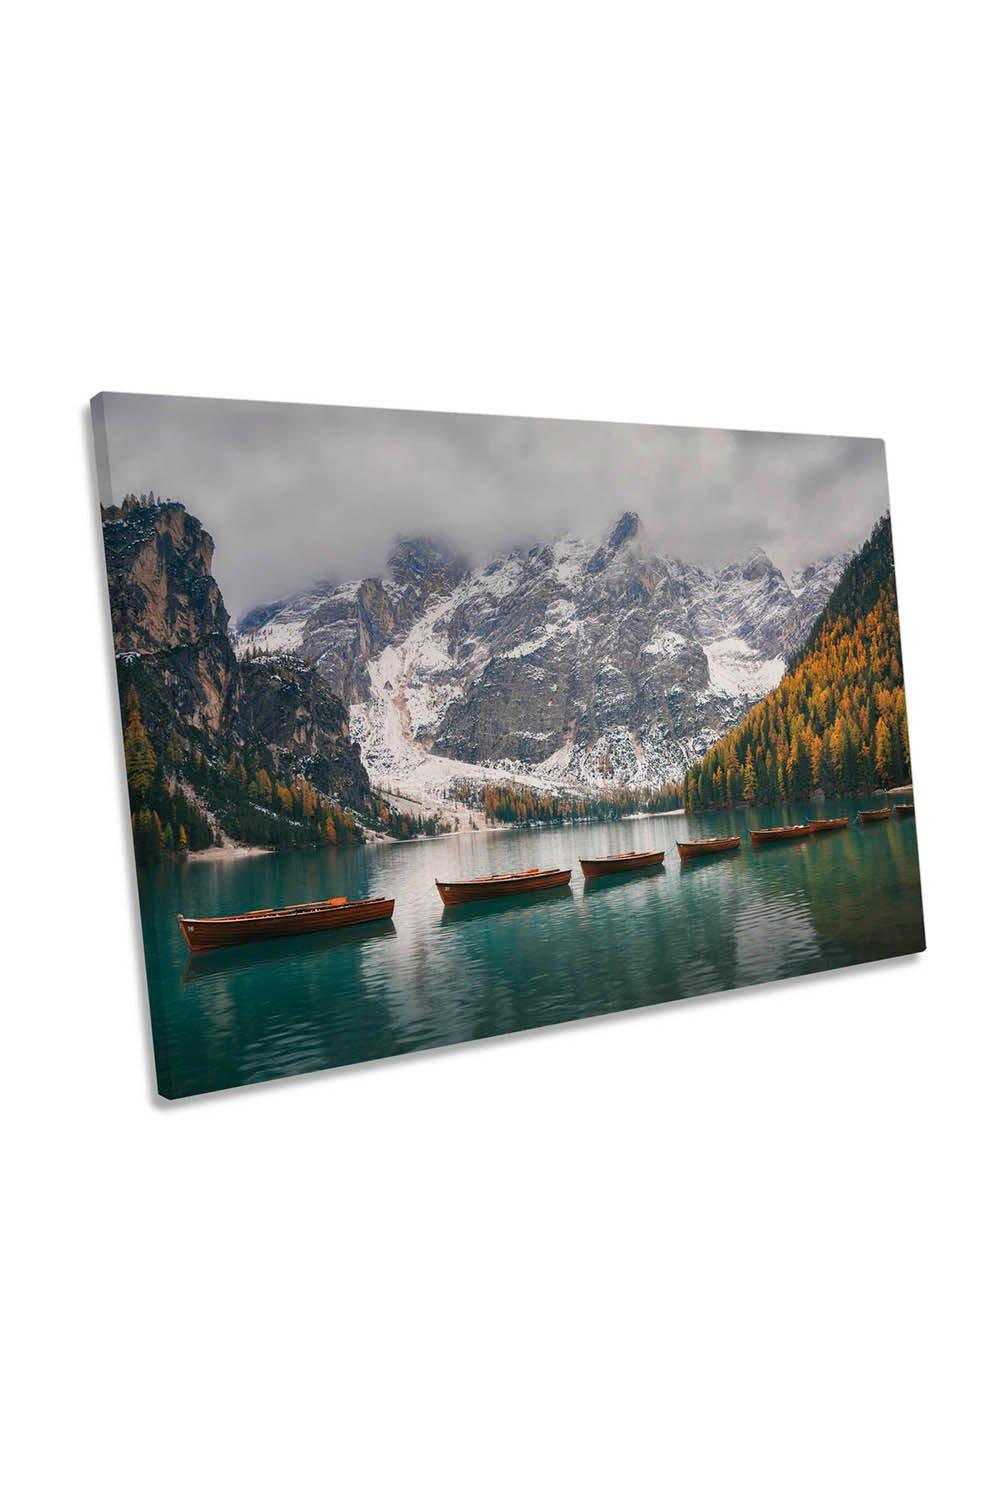 Follow the Leader Boats Lake Mountains Canvas Wall Art Picture Print